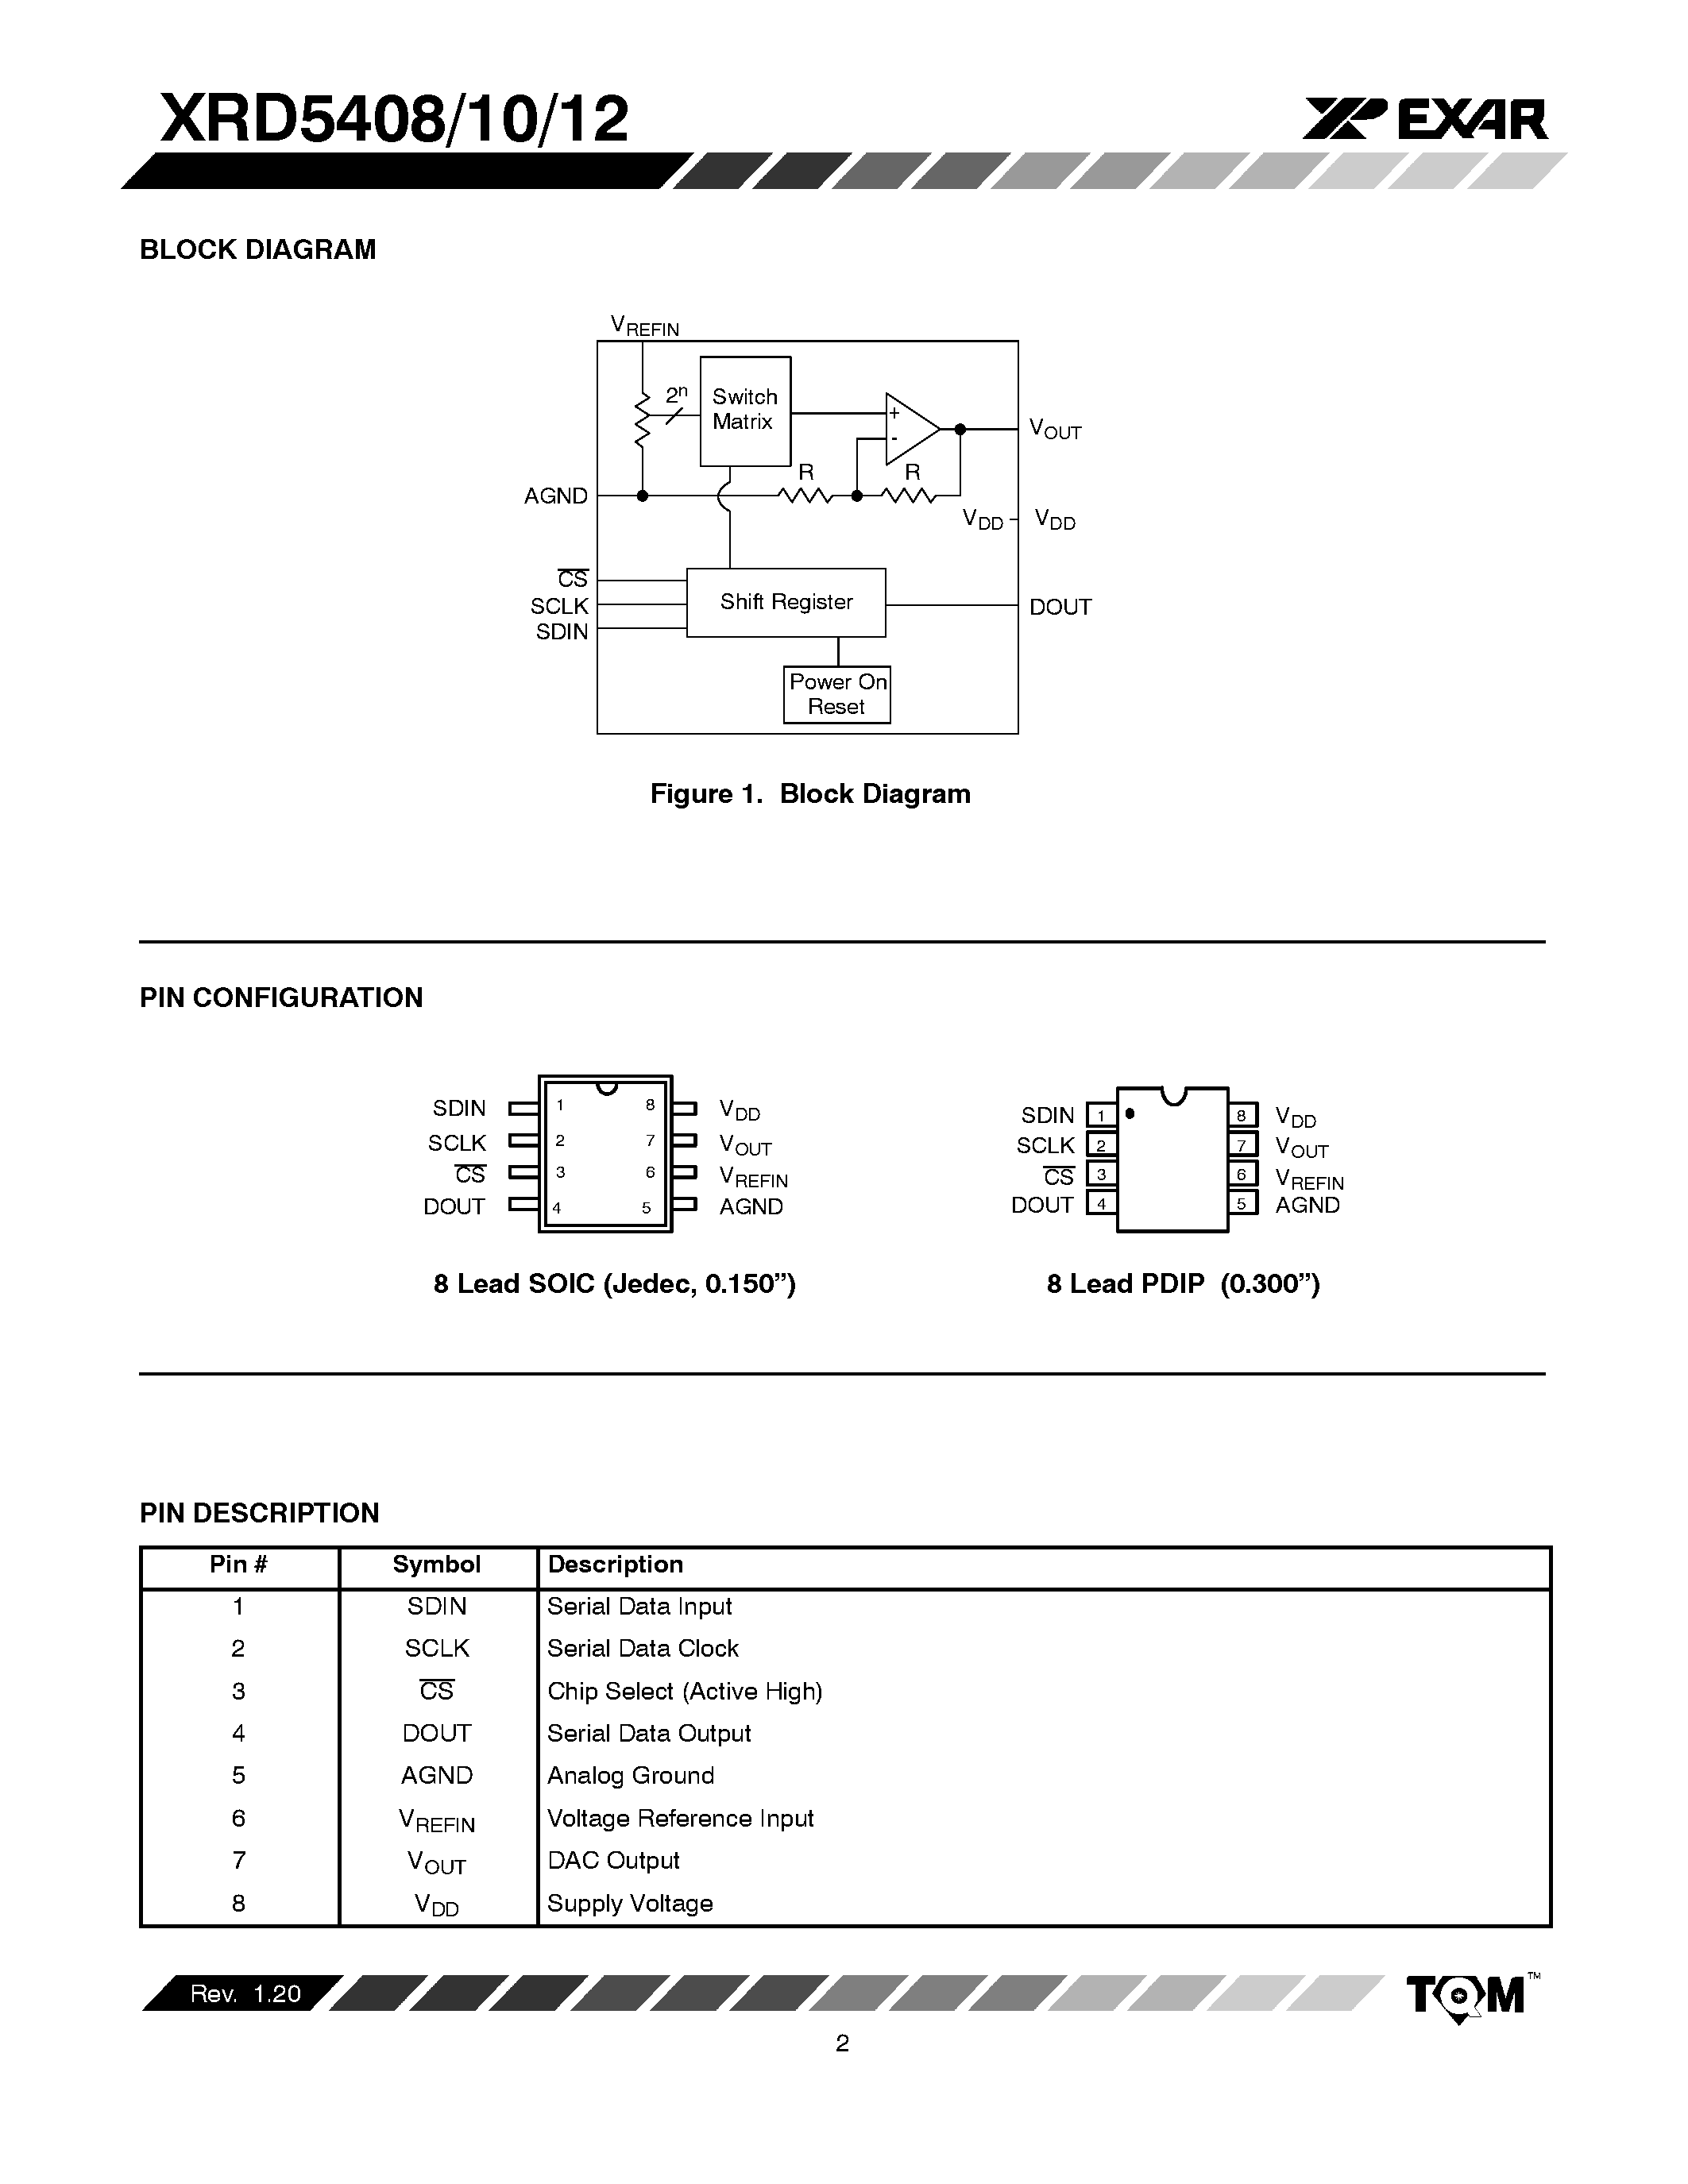 Datasheet XRD5408 - 5V/ Low Power/ Voltage Output Serial 8/10/12-Bit DAC Family page 2